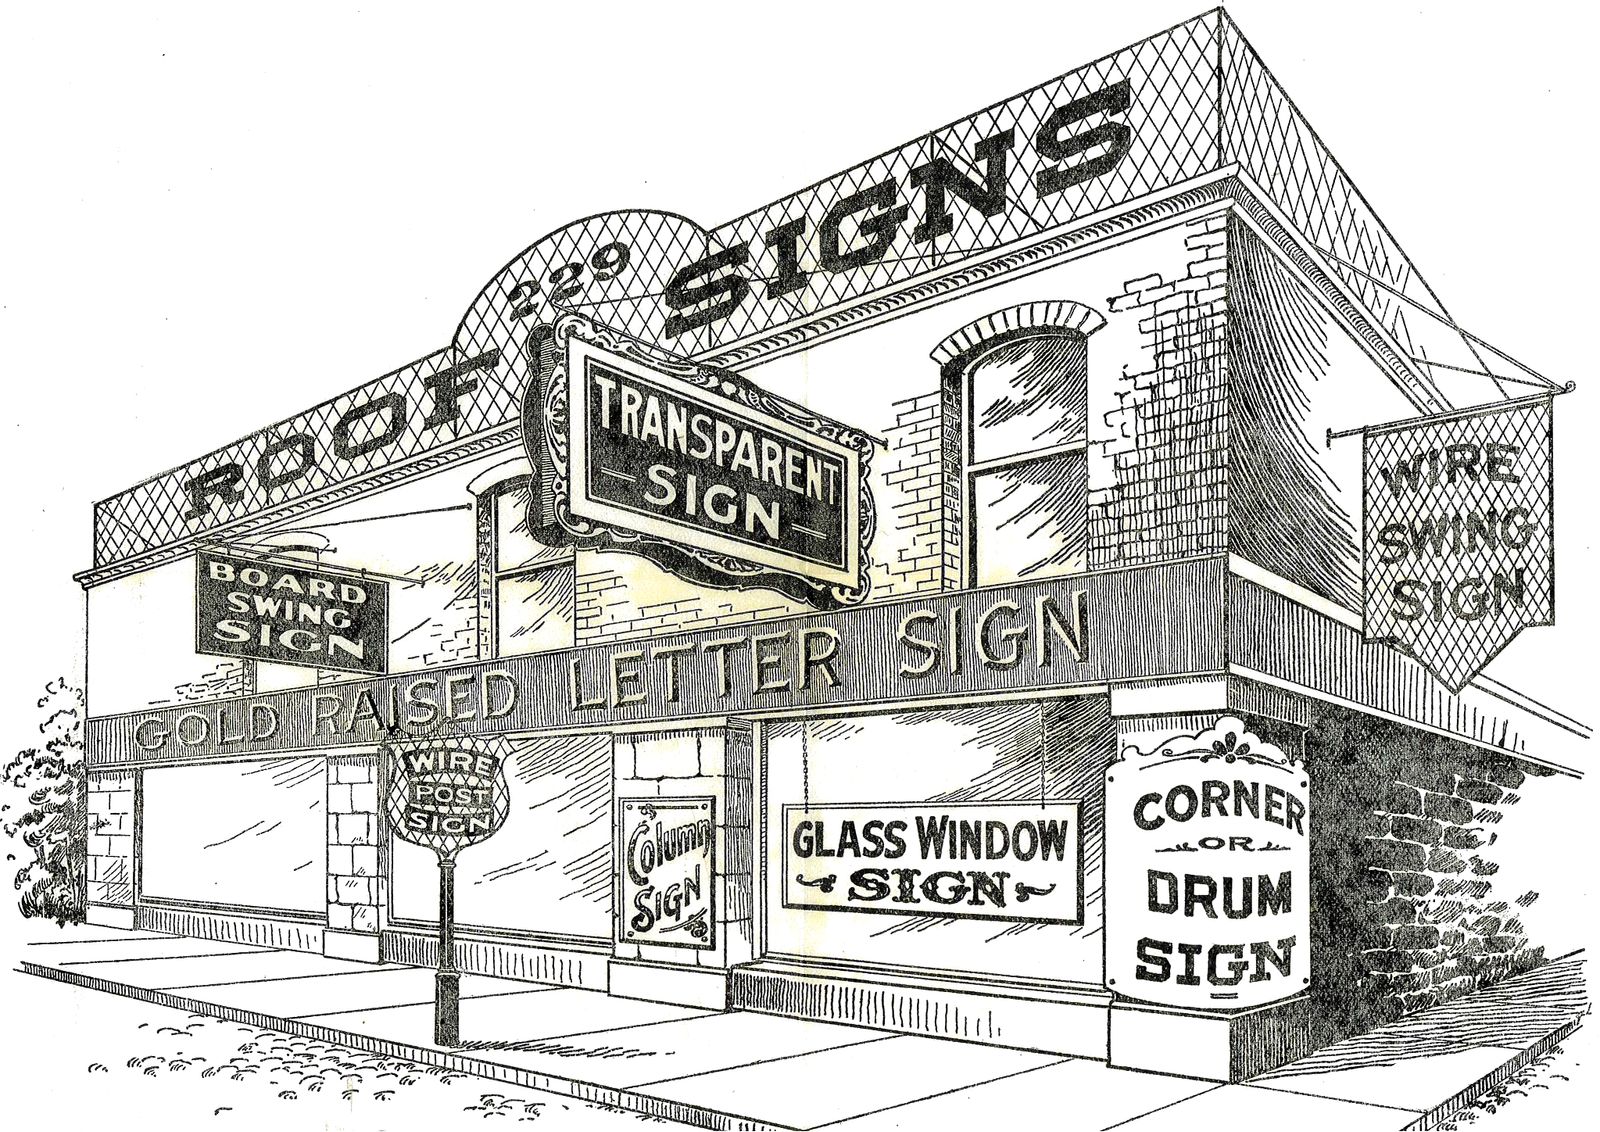 Illustration of building and signs giving names of each type of sign